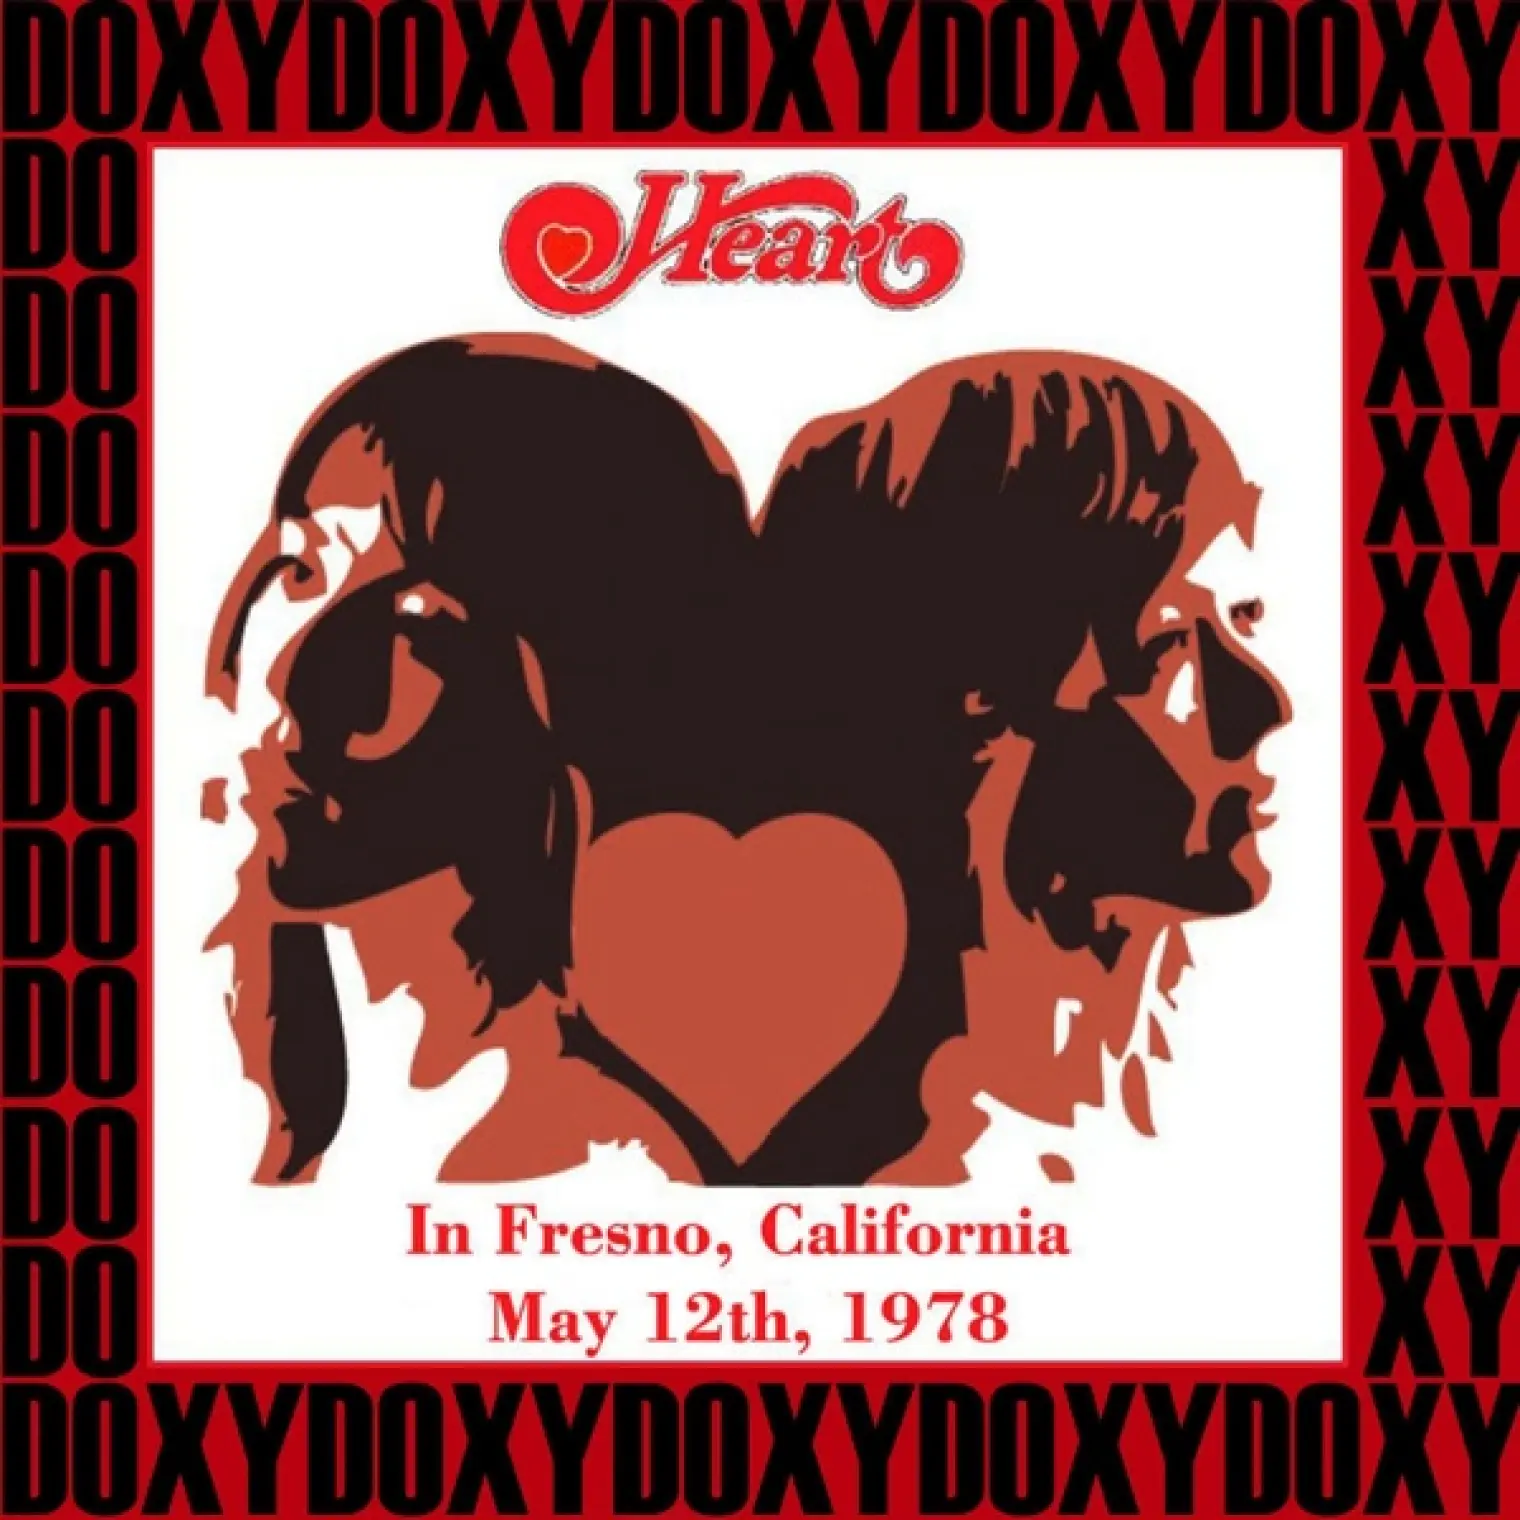 In Fresno, California, May 12th, 1978 (Doxy Collection, Remastered, Live on Fm Broadcasting) -  Heart 